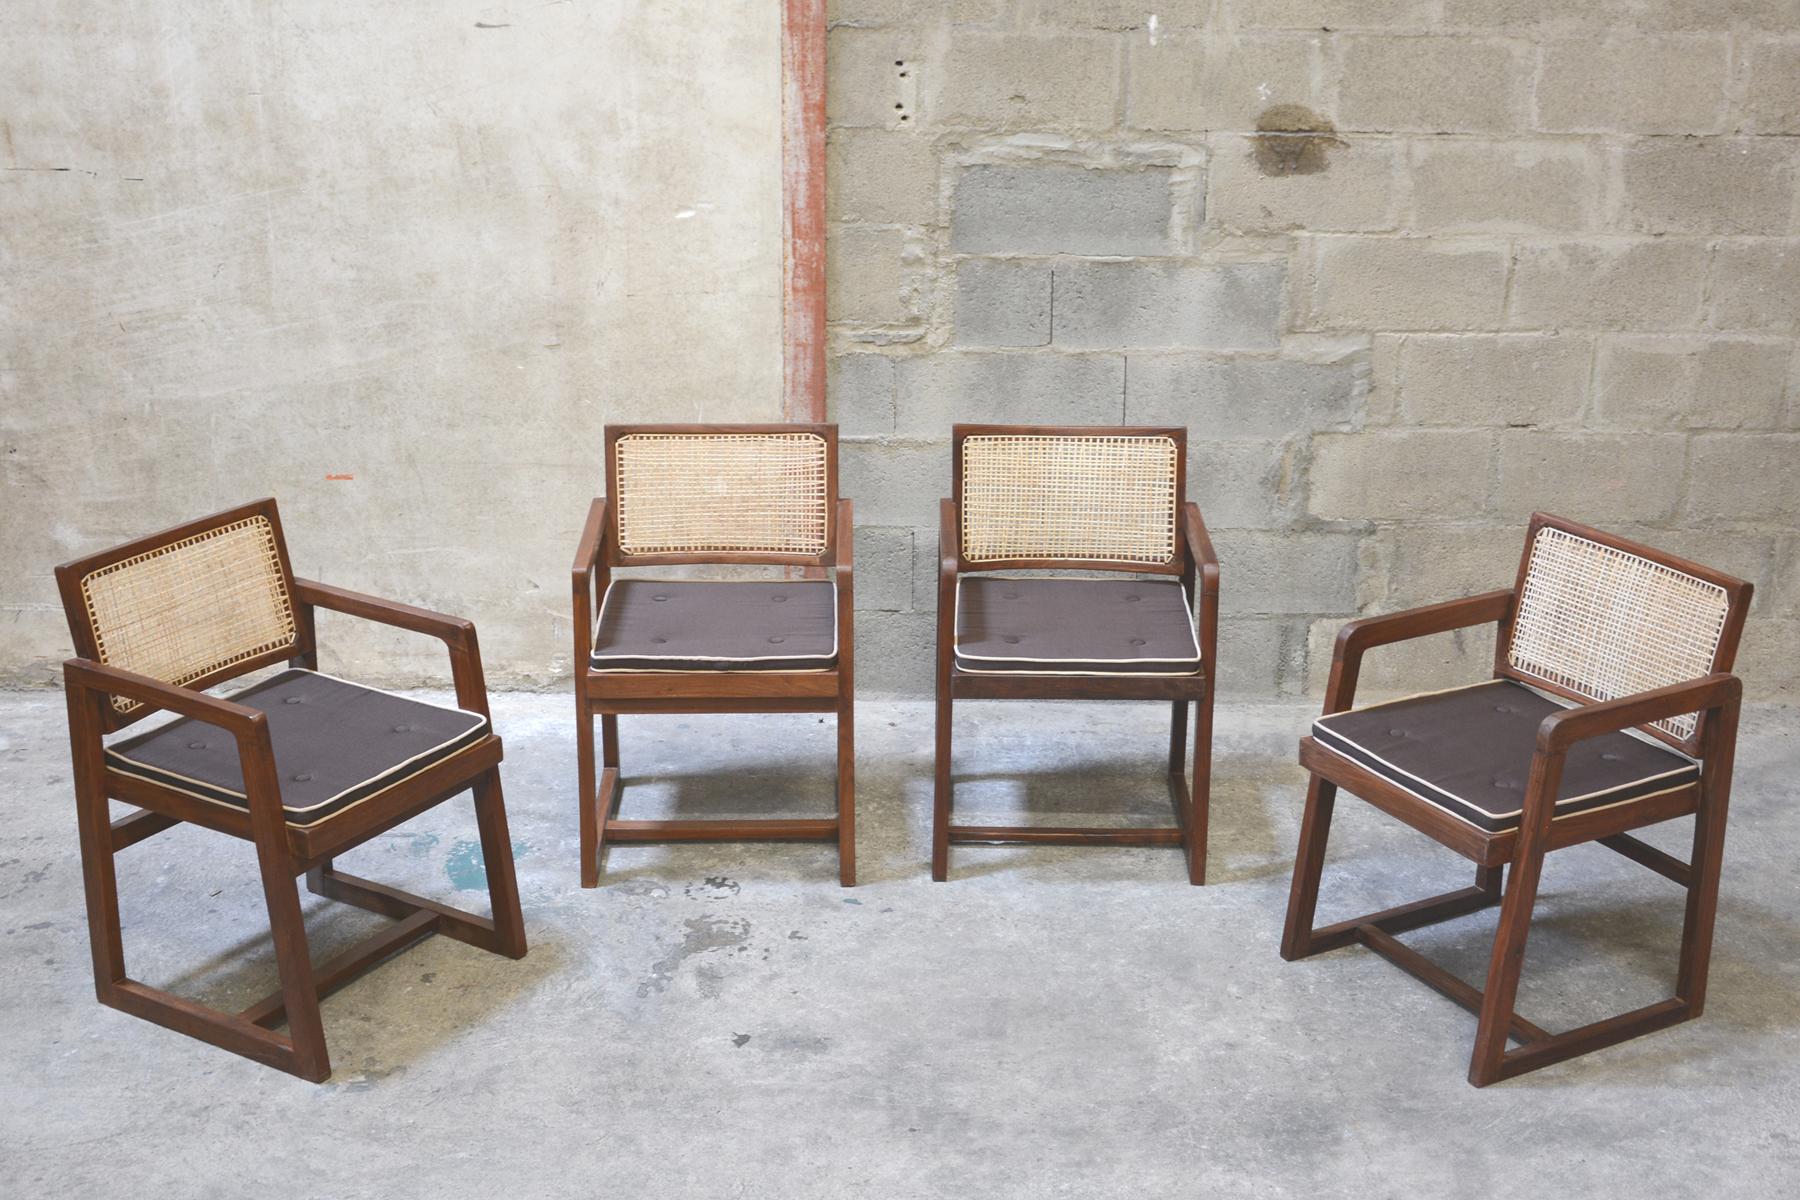 Pierre Jeanneret, rare set of 4 cane and teak wood chairs designed for P.U. University Library in Chandigarh (1966), India. Teak, woven cane and upholstered new seat cushion featuring cloth covering. 

3 Chairs have their original lettering (see